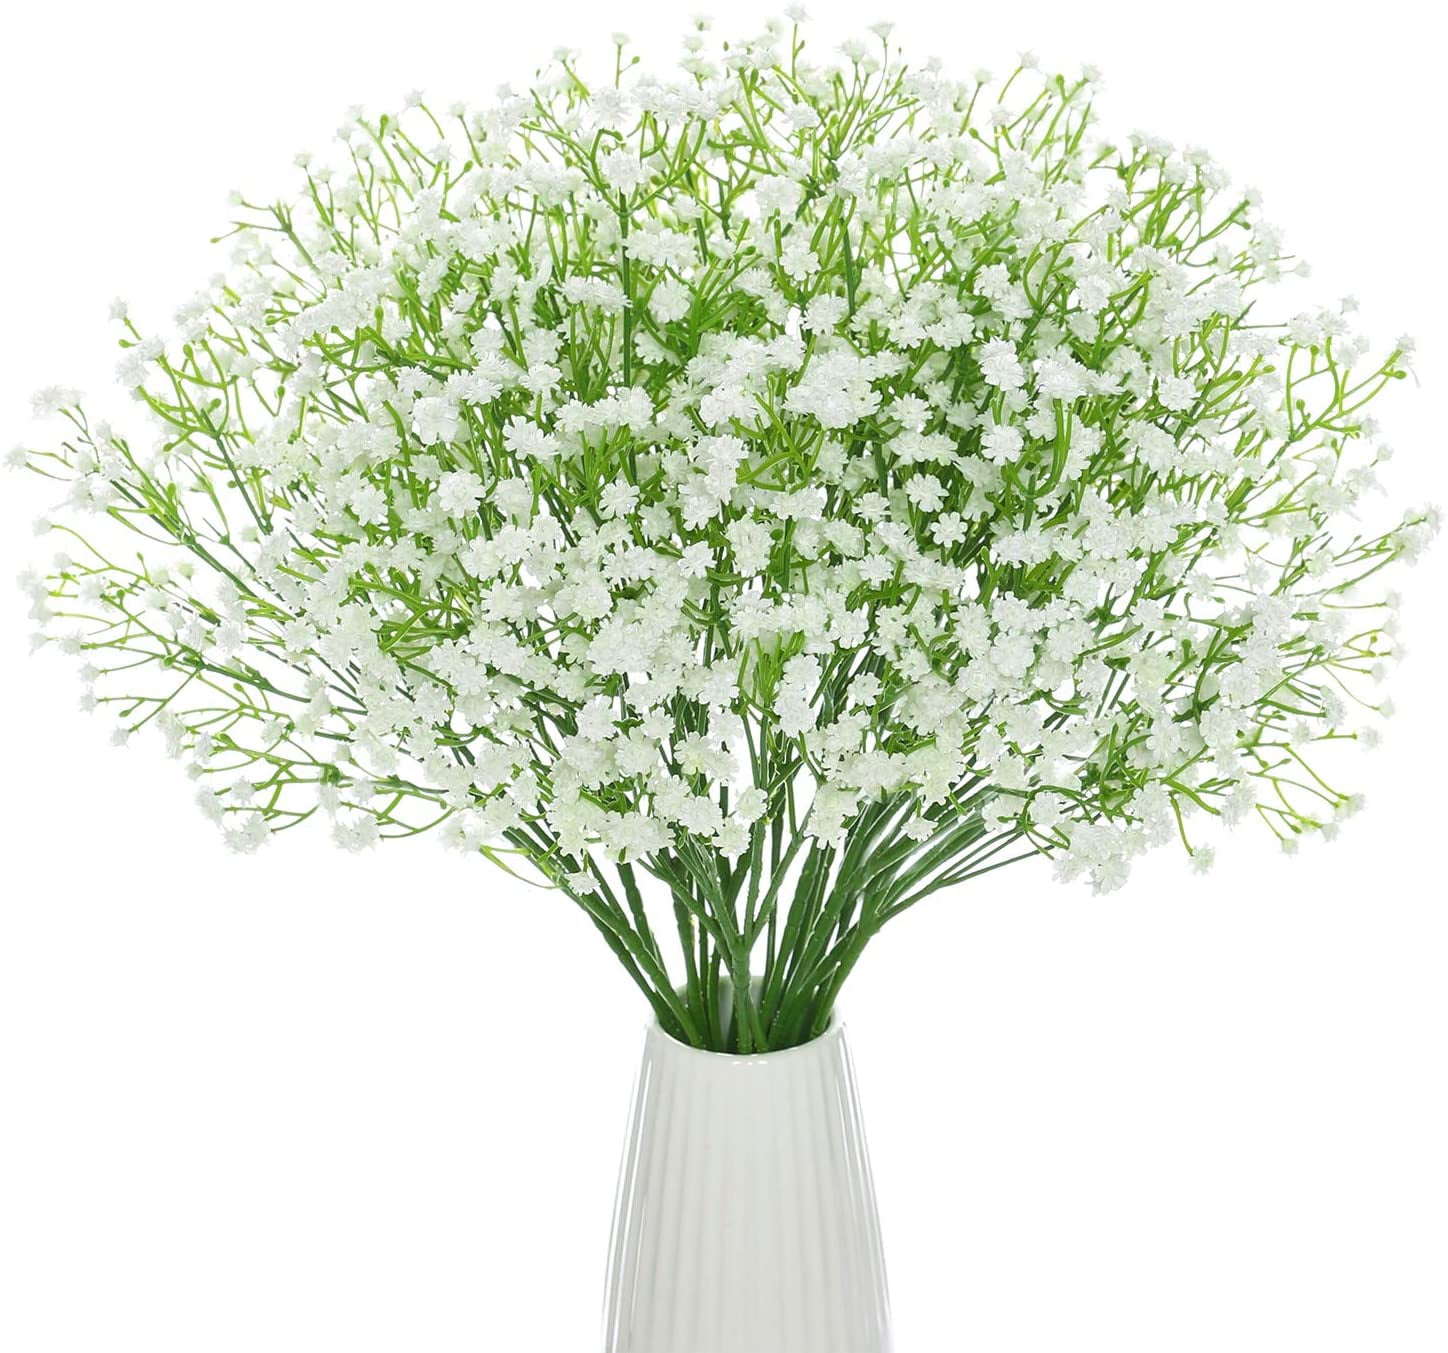 Zukuco 10Pcs Babys Breath Artificial Flowers Fake Flowers Real Touch  Gypsophila Floral in Bulk for Home Wedding Garden Decor (White Long Stem) 